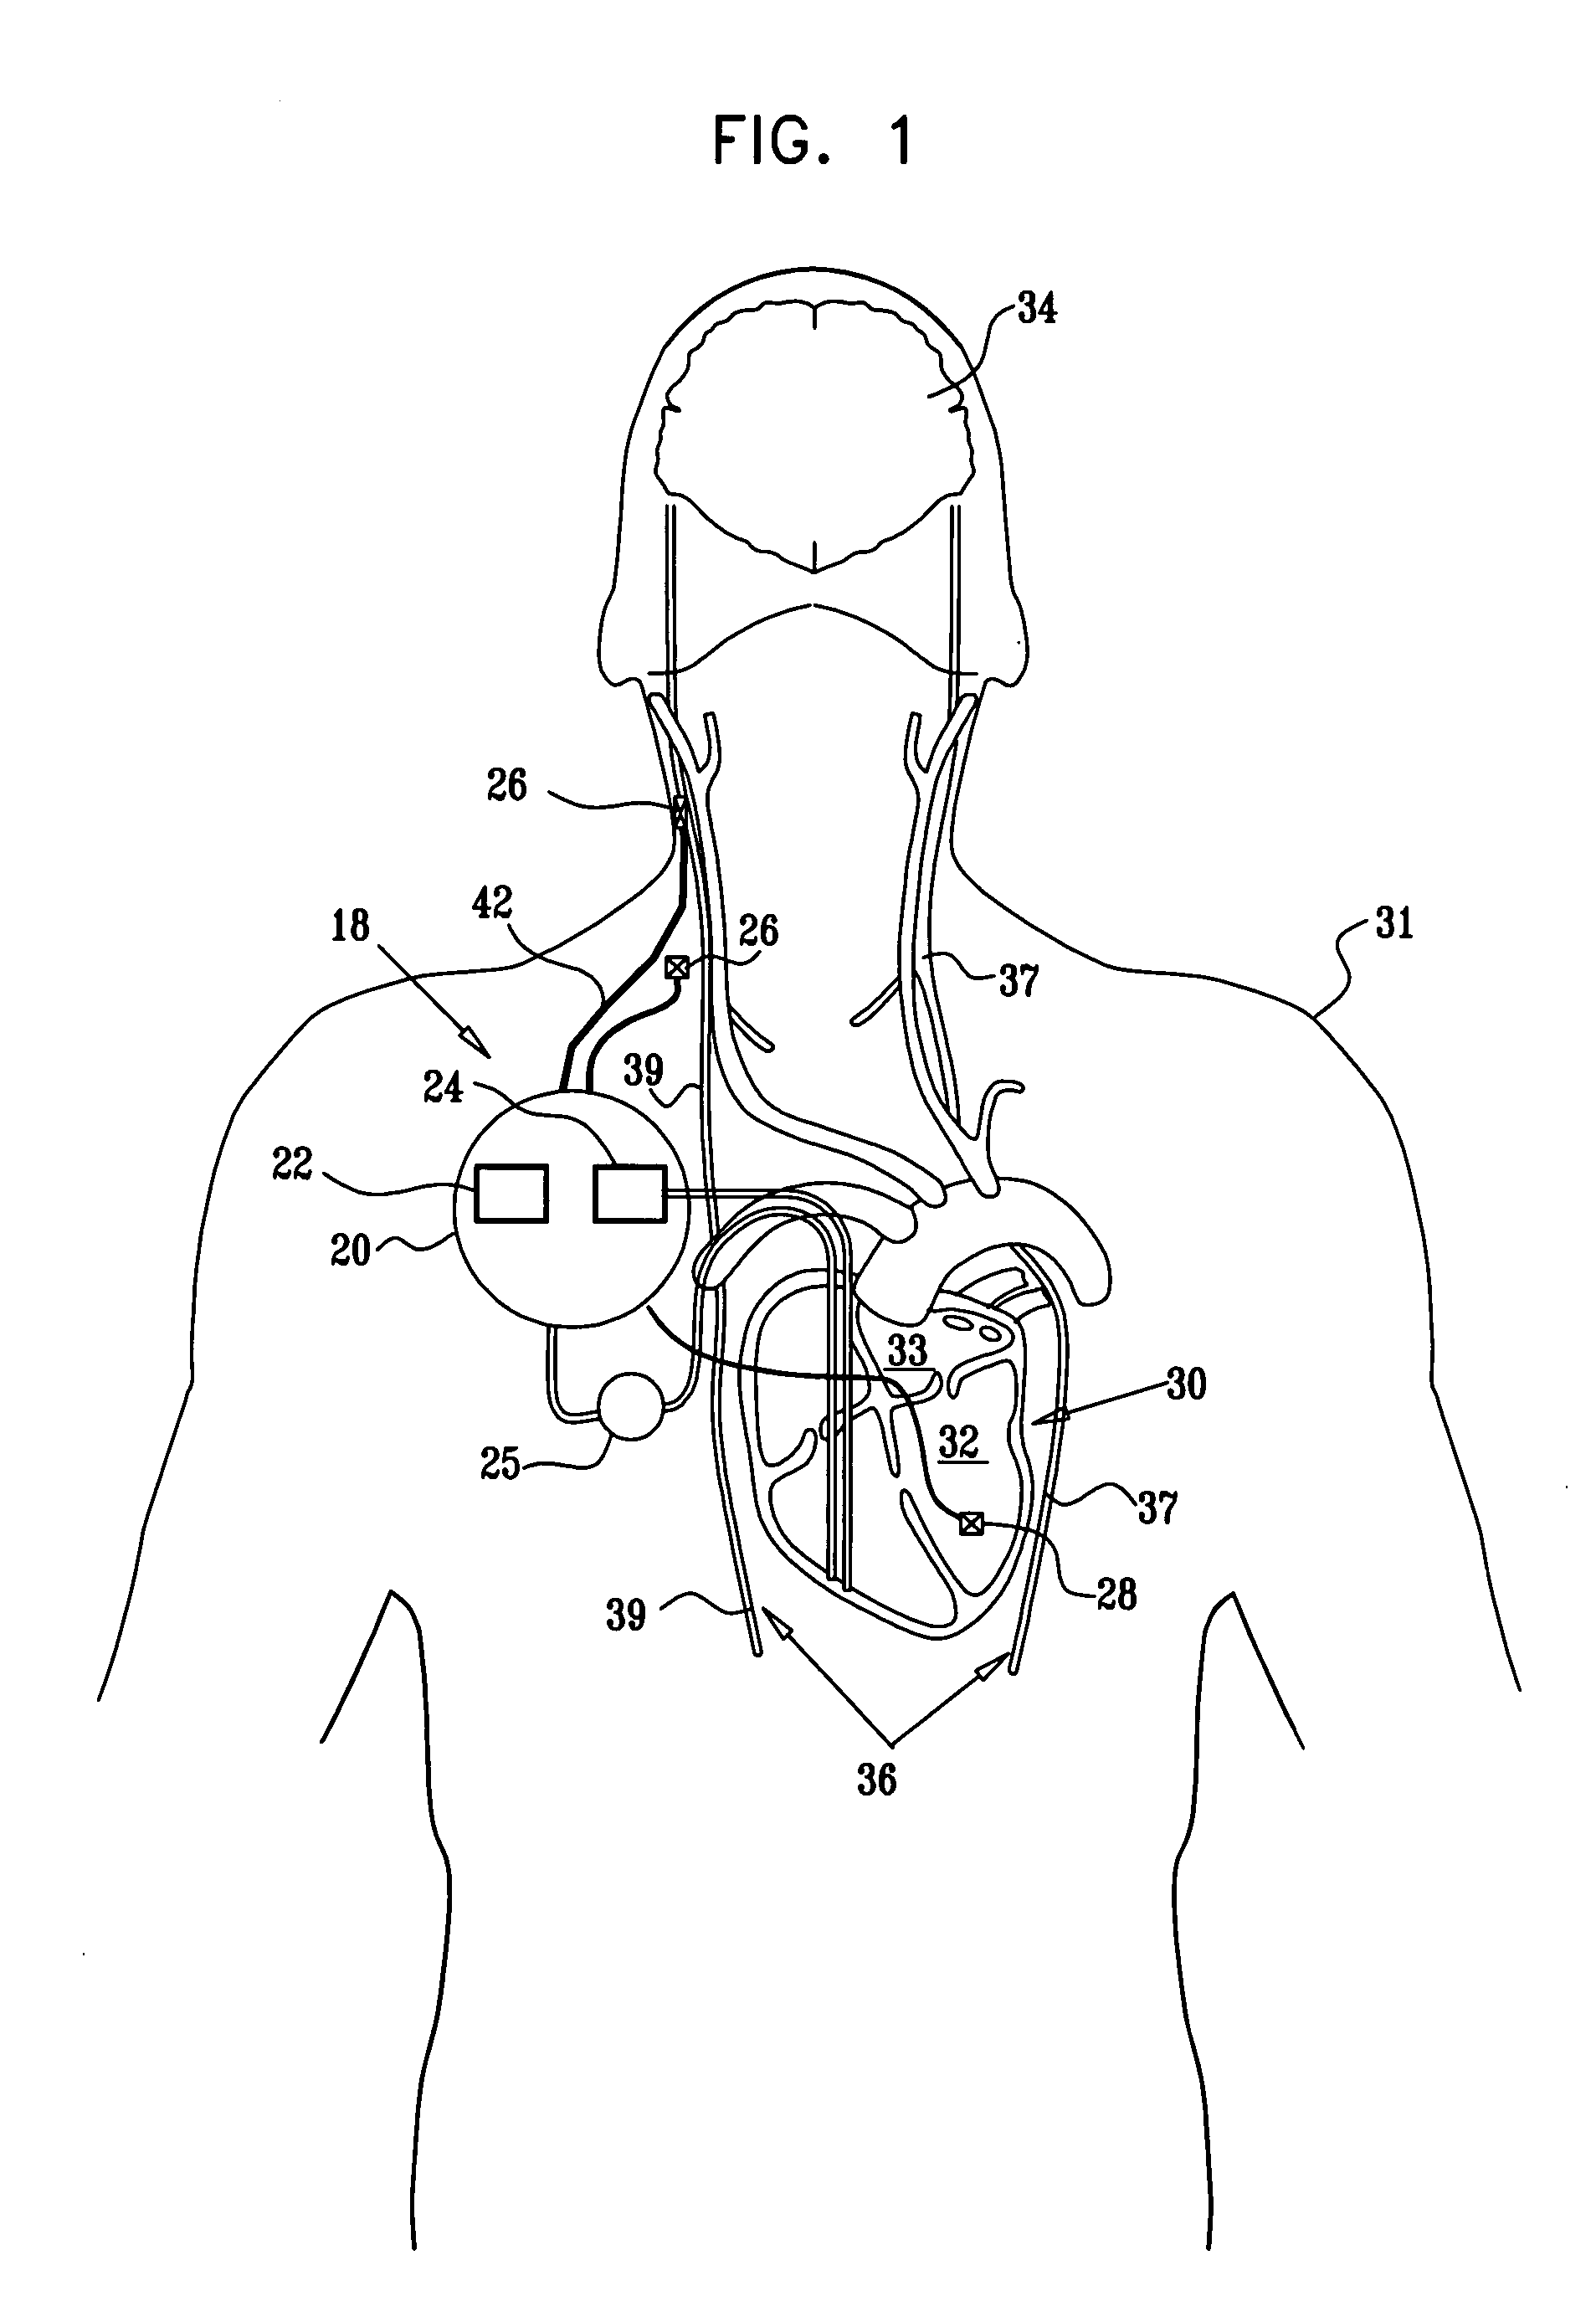 Method for surgically implanting an electrode device